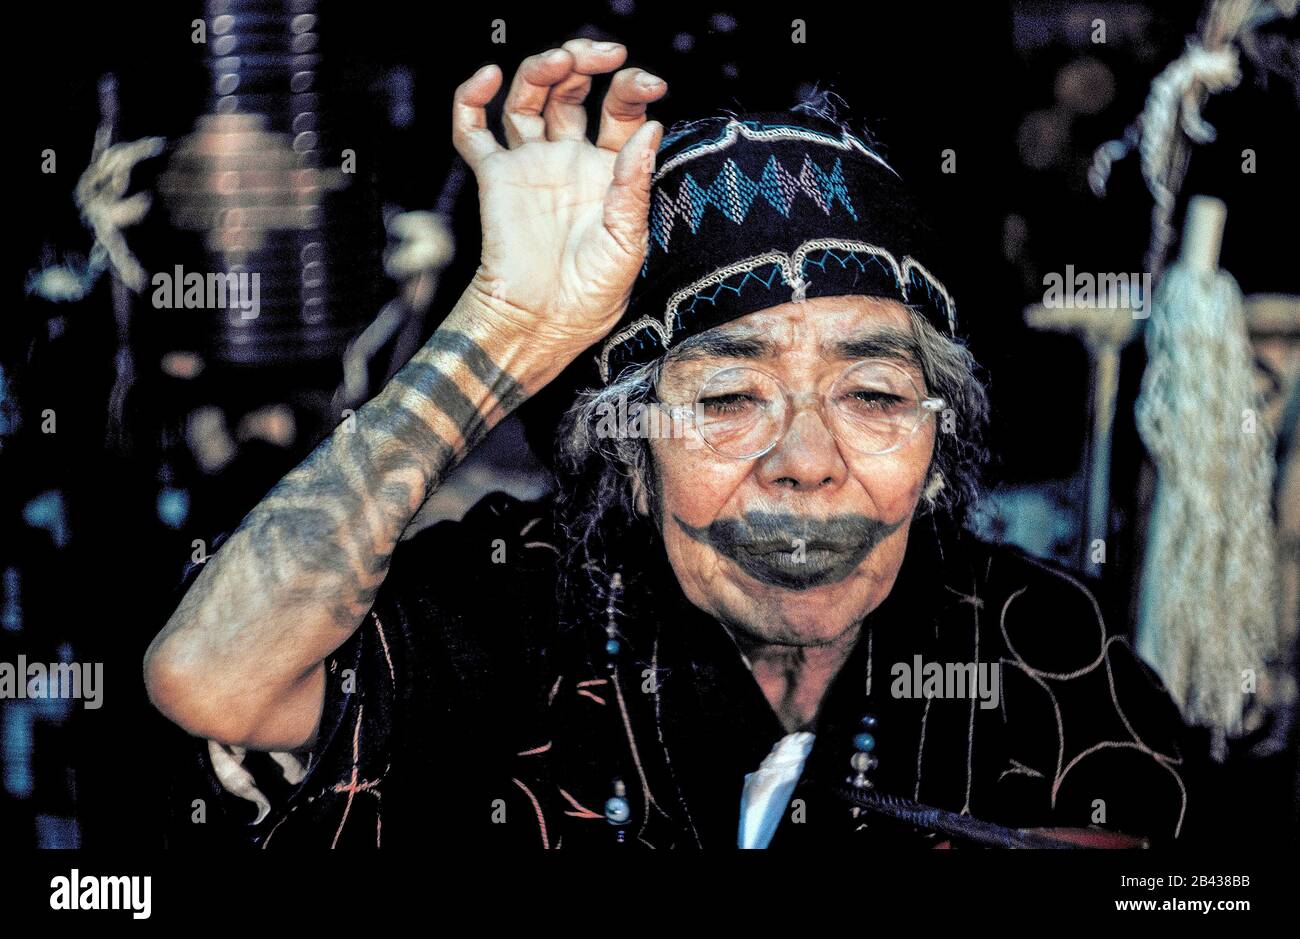 An elderly Ainu woman on the island of Hokkaido in northern Japan shows off tattooing that resembles a mustache around her mouth and encircles her arm. The painful tradition of rubbing soot into cuts in her skin was done during a girl's childhood to ward off evil spirits and to indicate she was qualified for marriage. The practice stopped more than a century ago after being outlawed by the Japanese government. The woman was one of only 300 pure-blooded Ainu still living when she posed for this historical photograph in 1962. Stock Photo